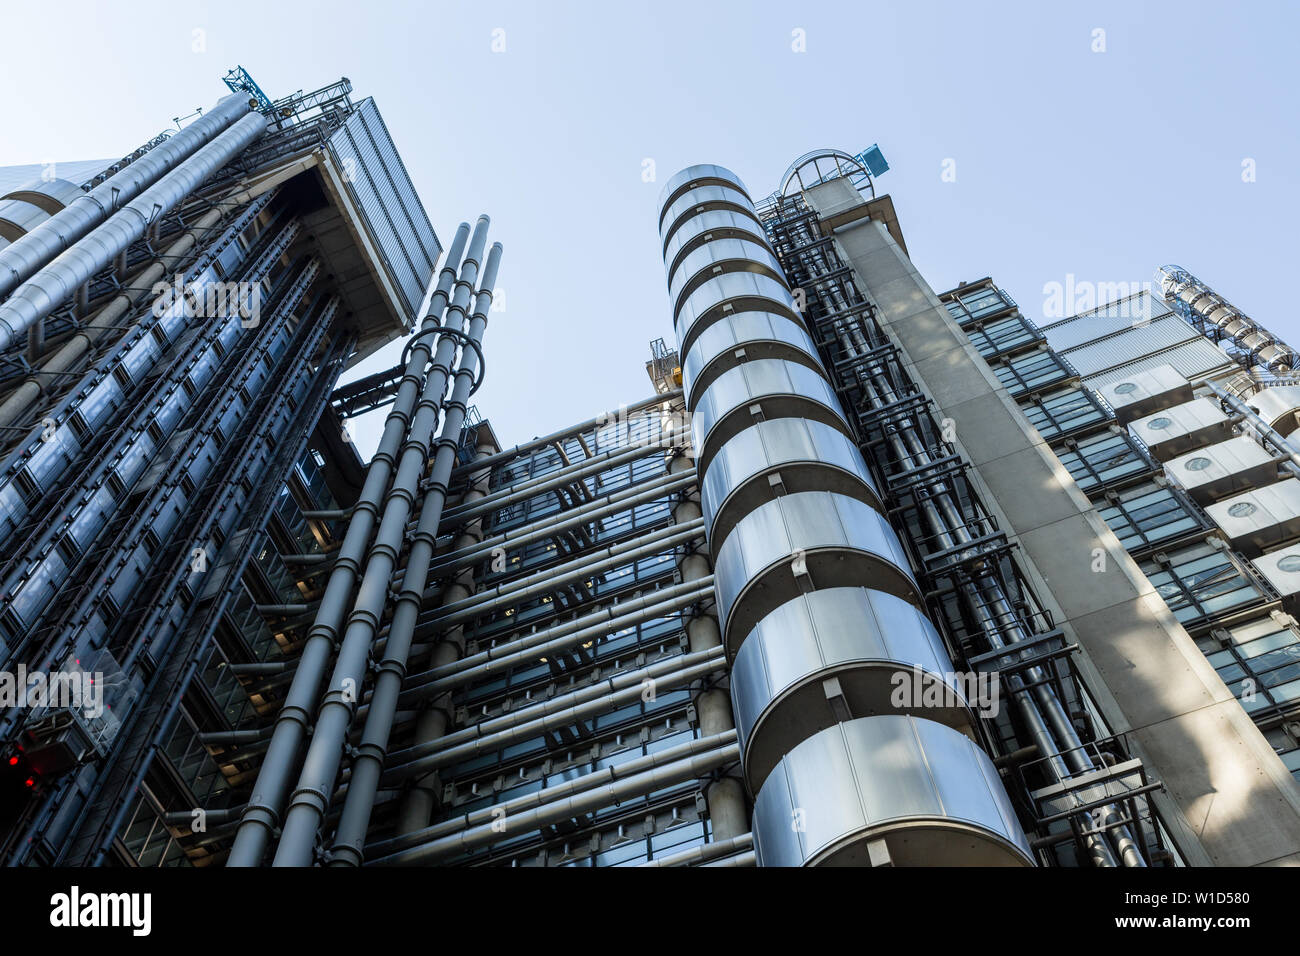 The Lloyd's building in London's main finalcial district, the City. The building is a leading example of radical Bowellism architecture. Stock Photo